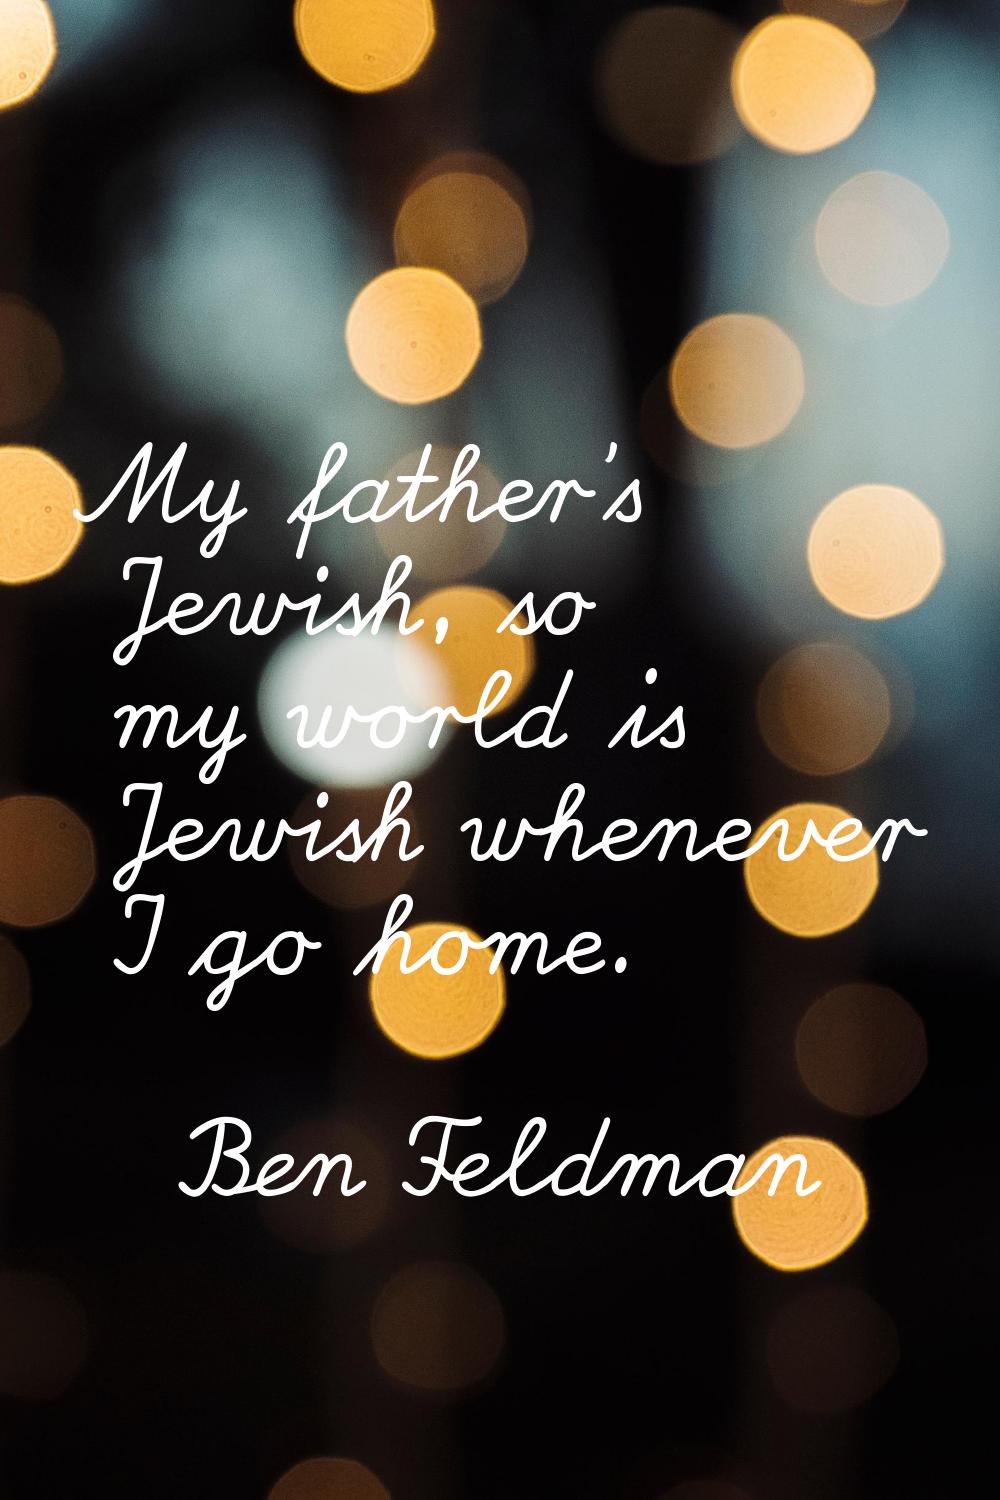 My father's Jewish, so my world is Jewish whenever I go home.